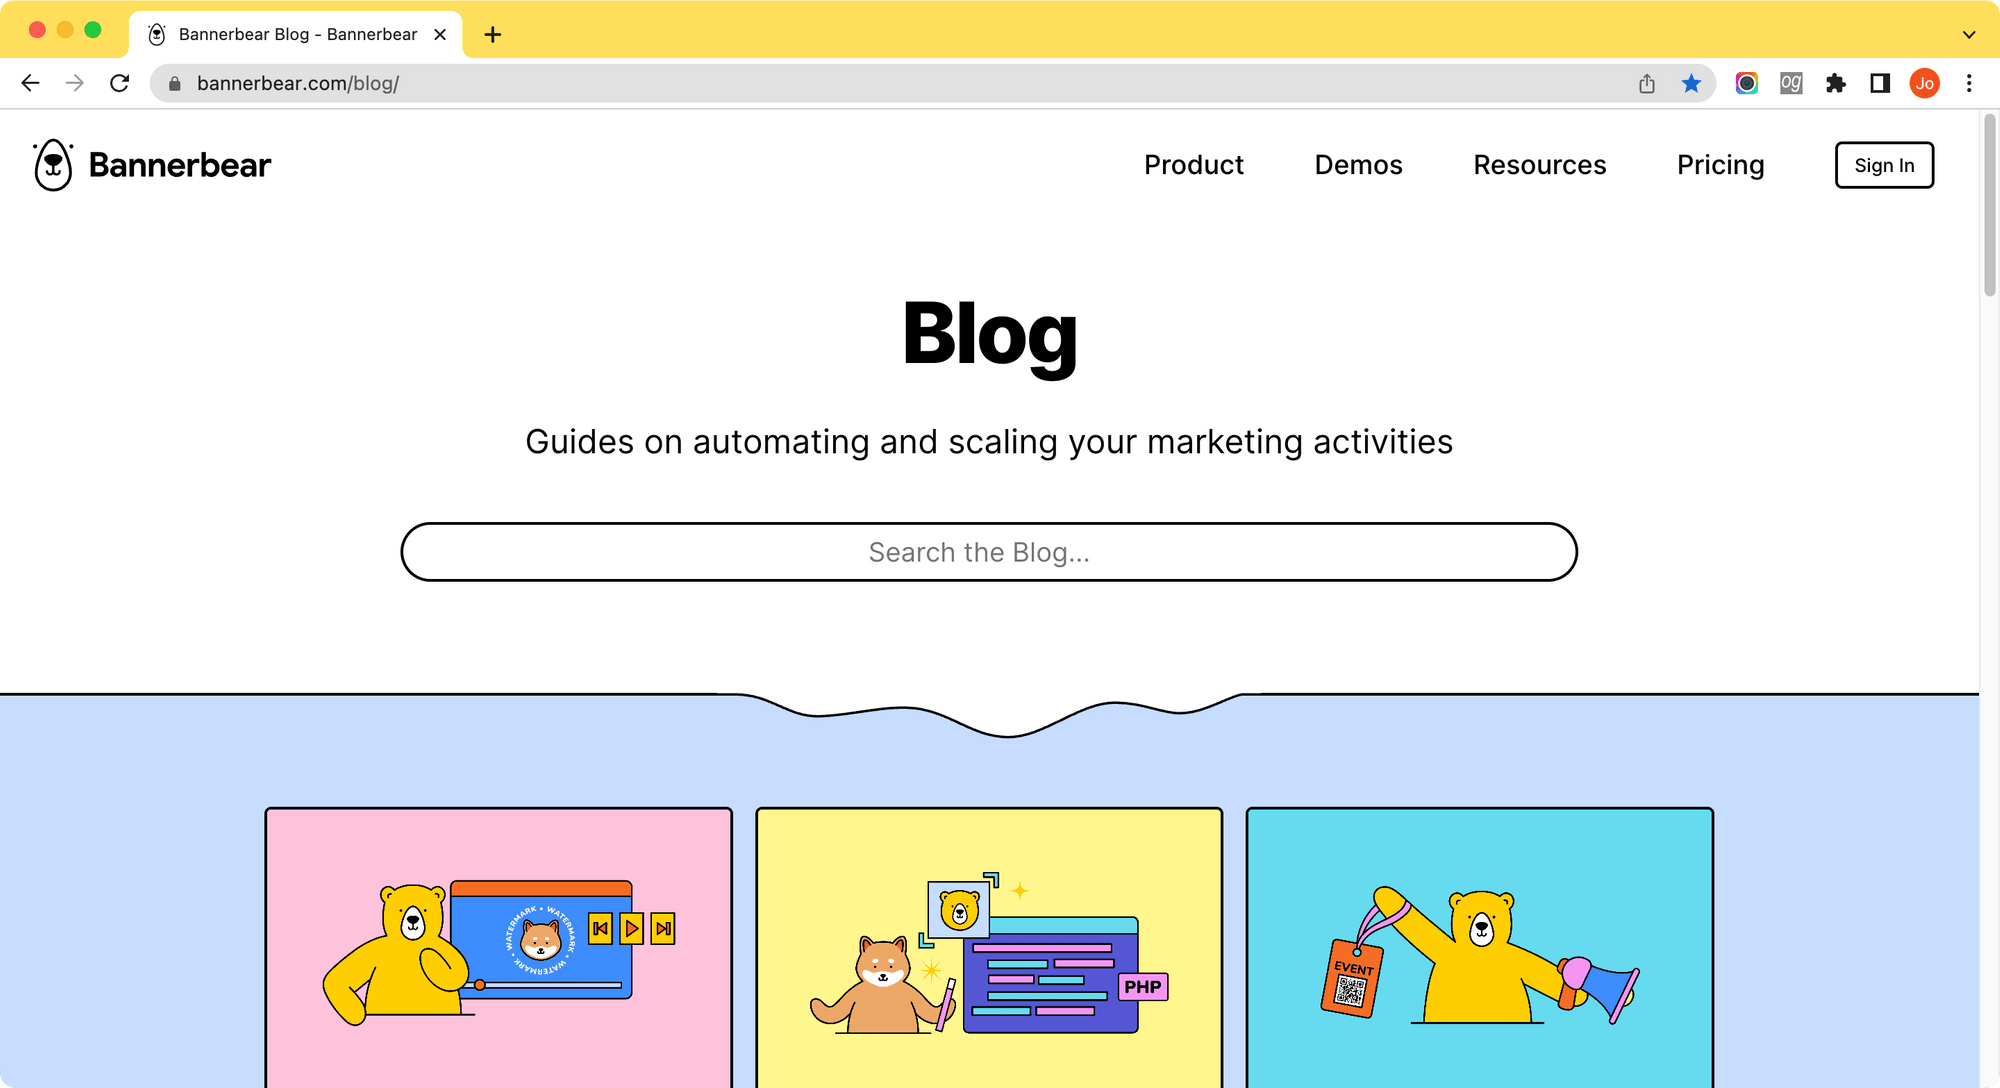 a screenshot of Bannerbear Blog with the page title changed from "Bannerbear Blog" to "Blog"